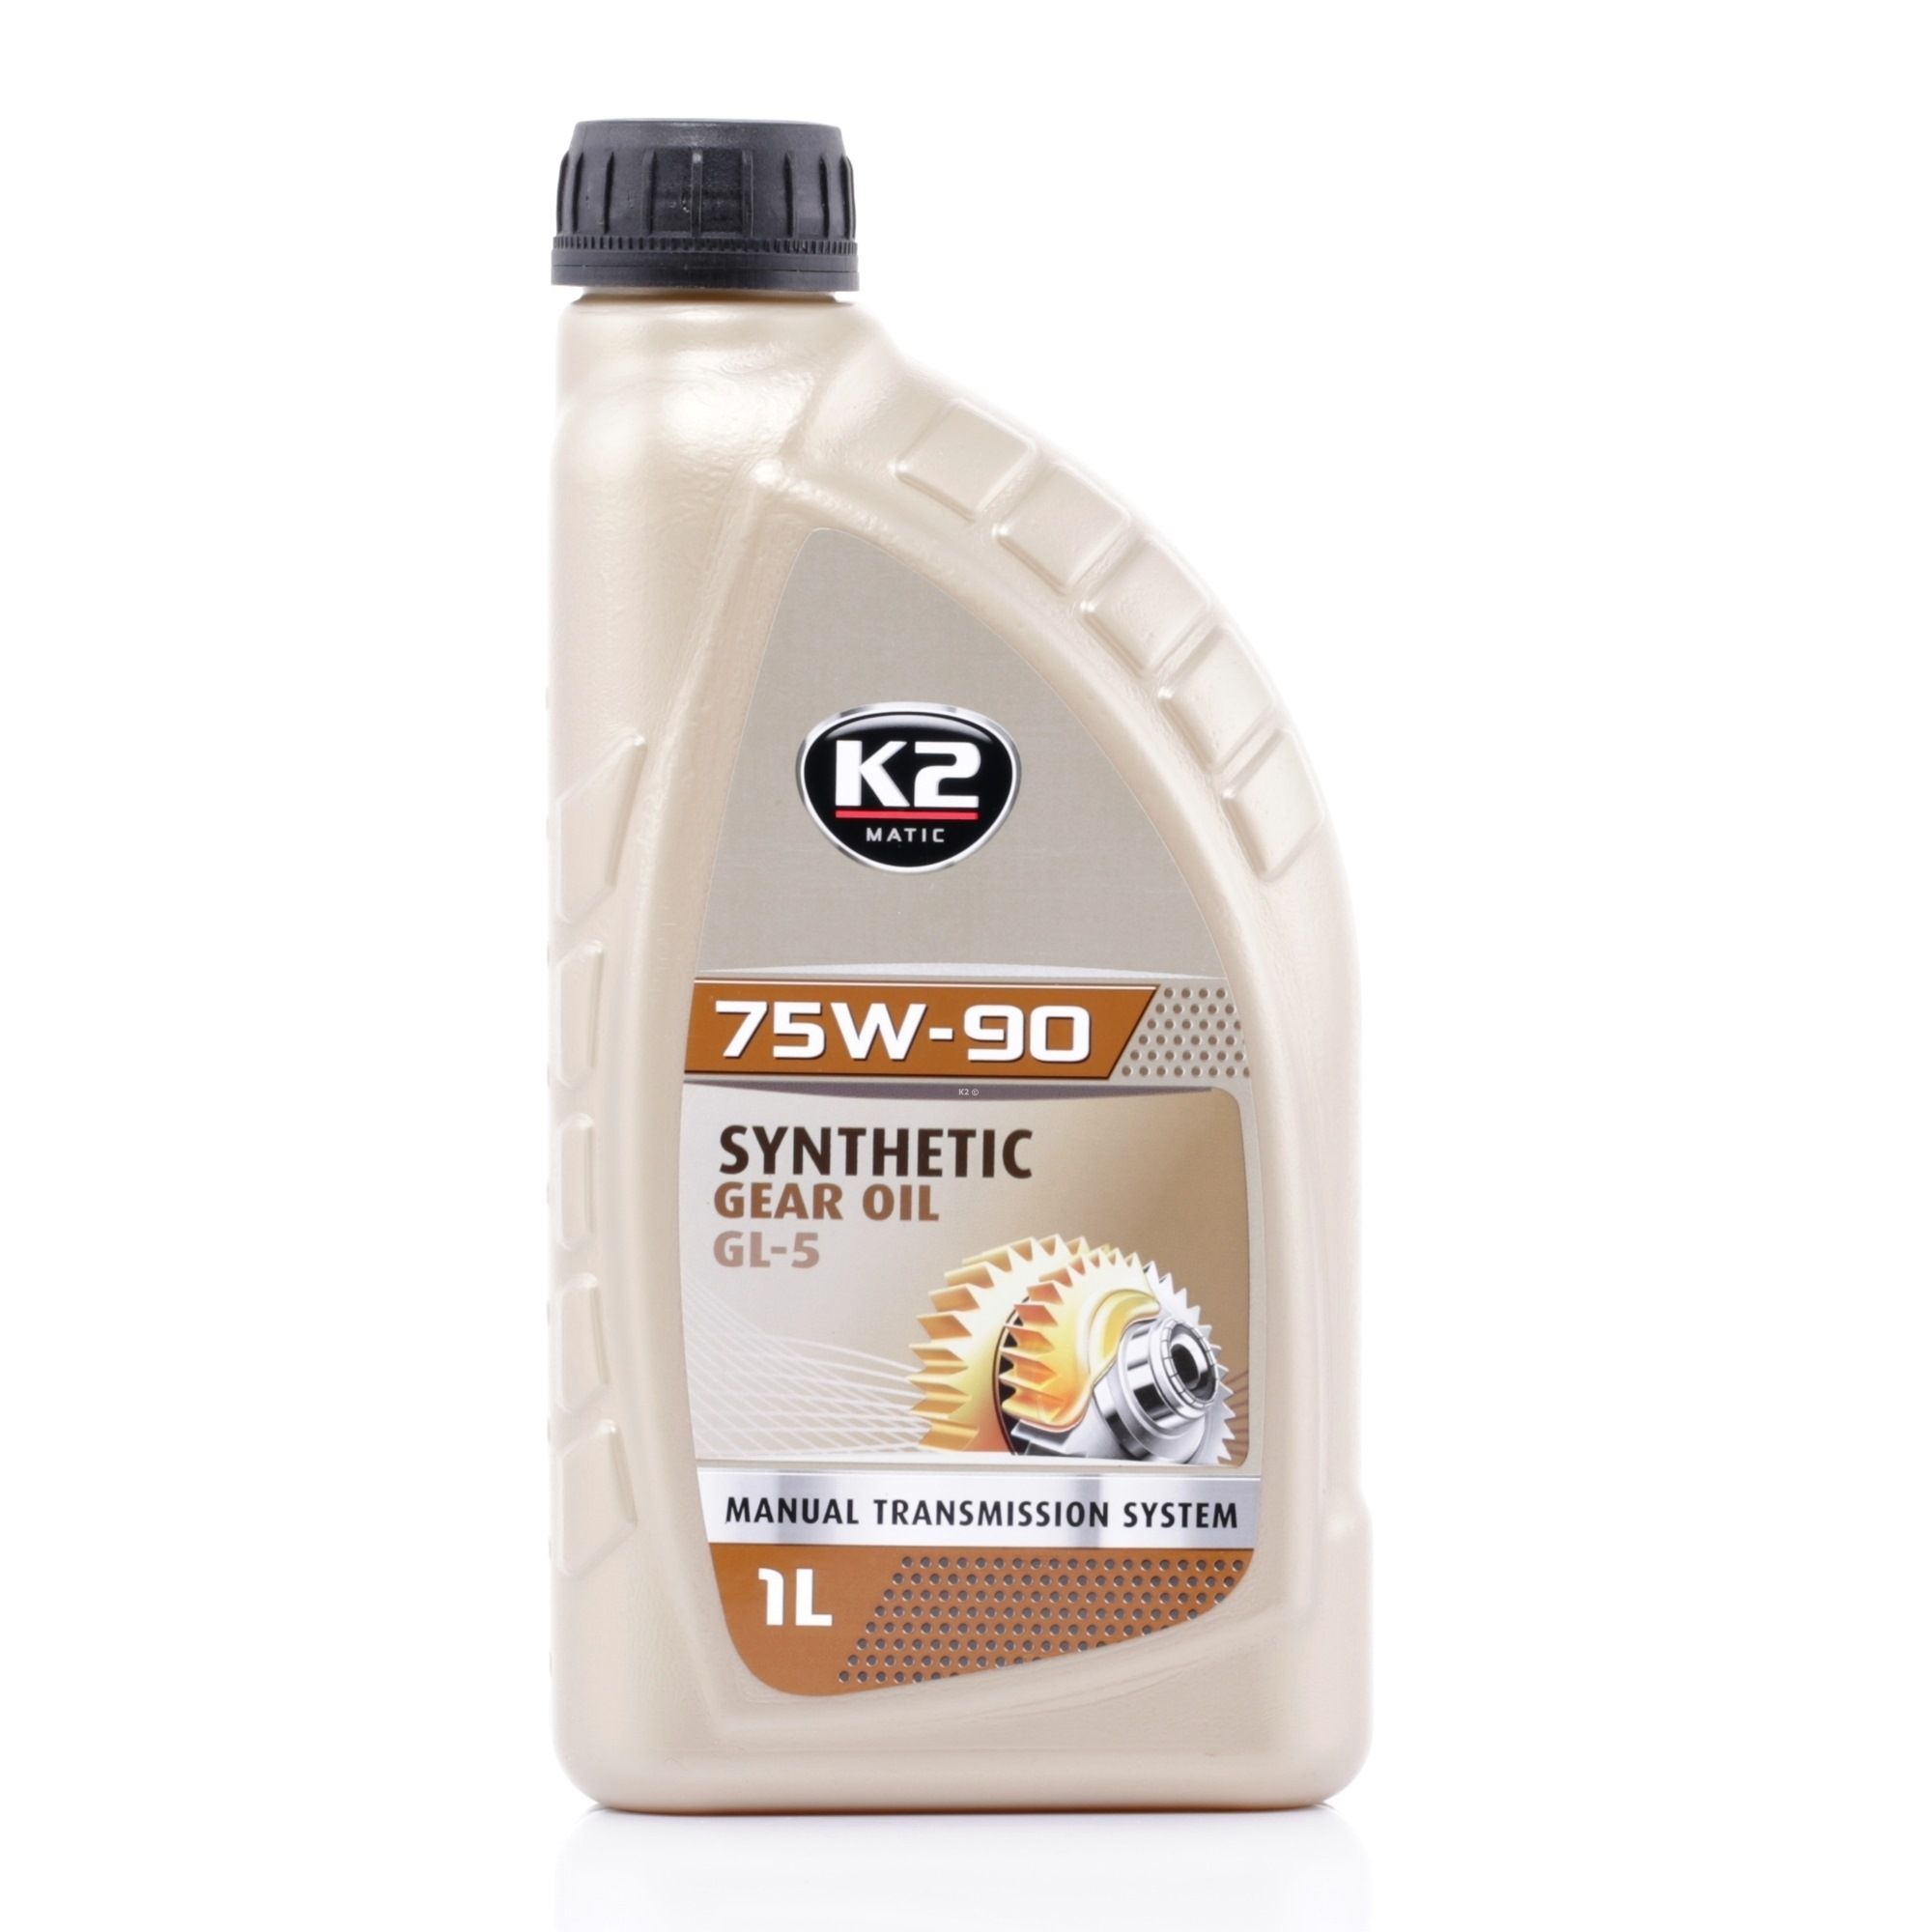 O5561S K2 MATIC 75W-90, Full Synthetic Oil, Capacity: 1l Transmission fluid O5561S cheap